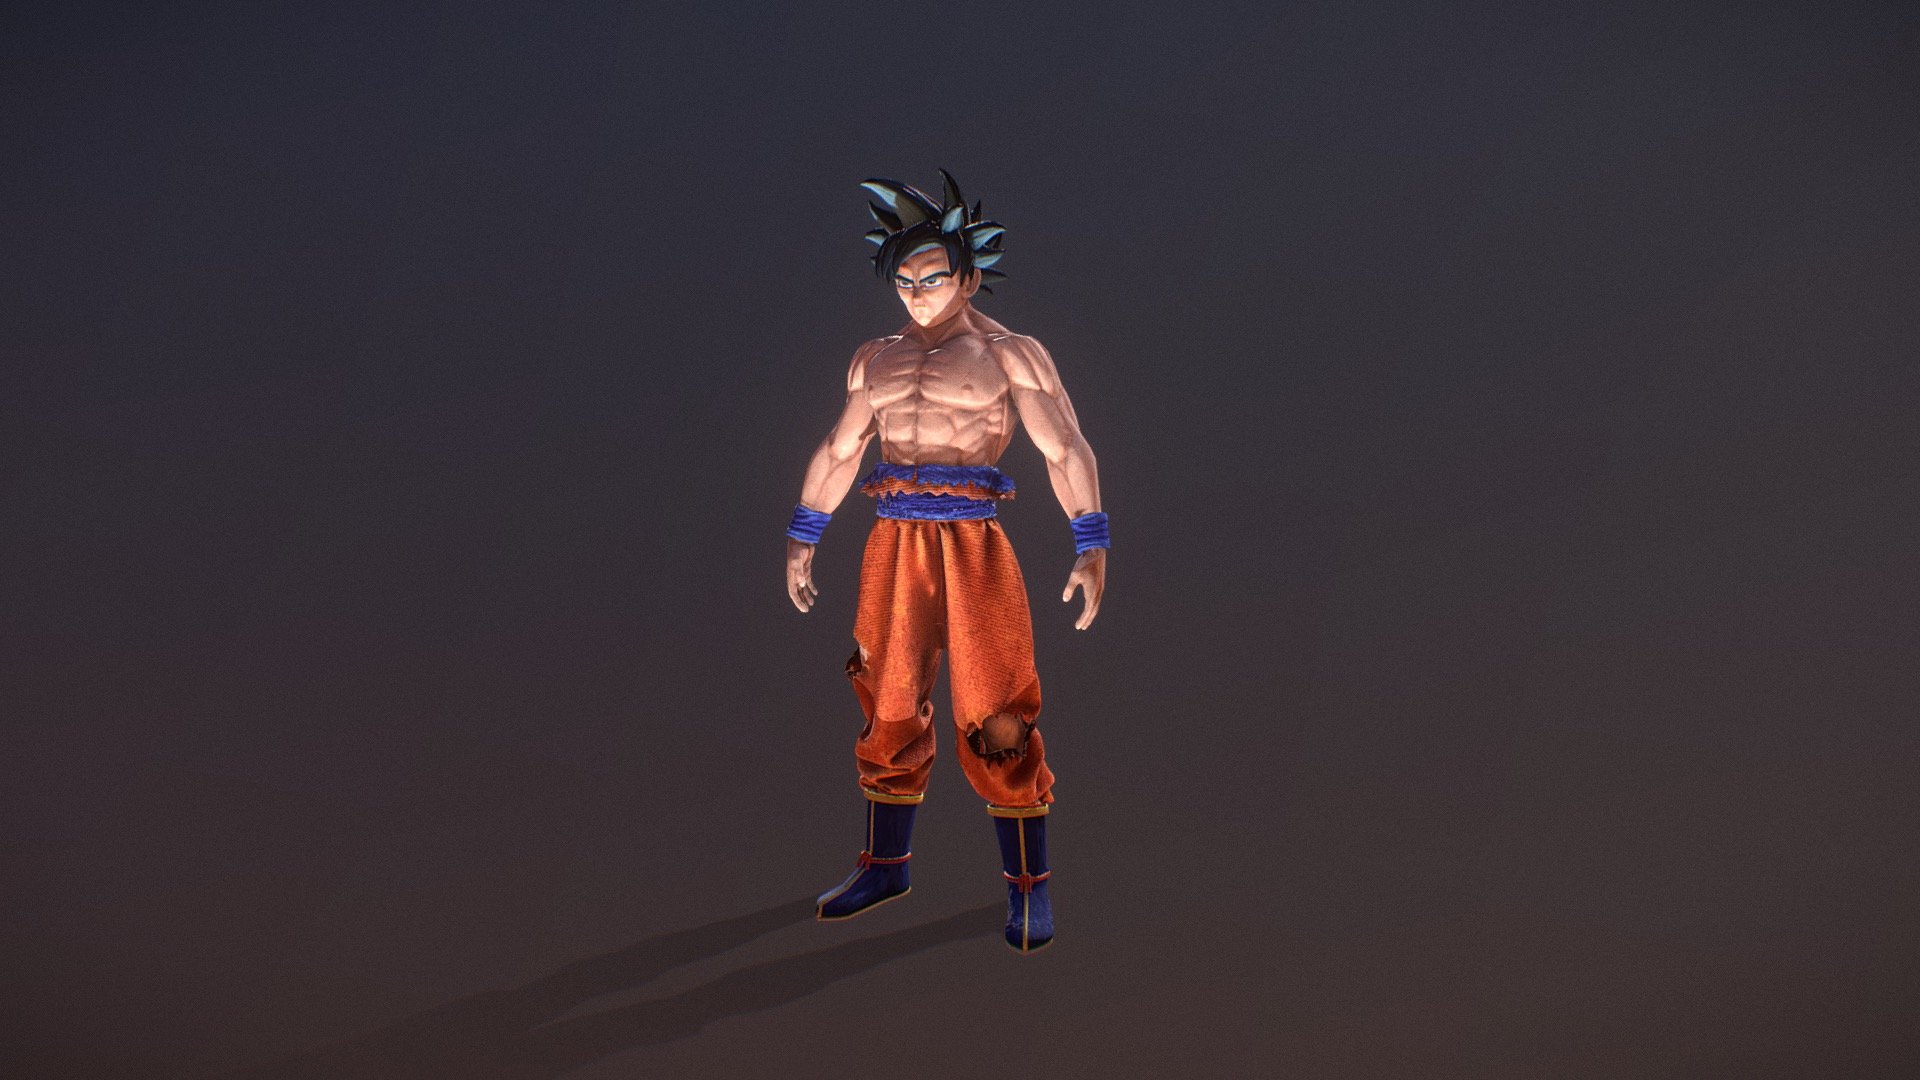 Hello everyone! 
This week I wanted to challenge myself by creating a character in just five days, from start to finish, and in a style I had never done before.
I decided to make a fan art of Son Goku from Dragon Ball.
Let's see what you think, I hope you like it.
The character was designed, sculpted and modeled in Blender.
The clothes were created in Marvelous Designer.
The textures in Substance Painter and the render in Marmoset Toolbag 3d model